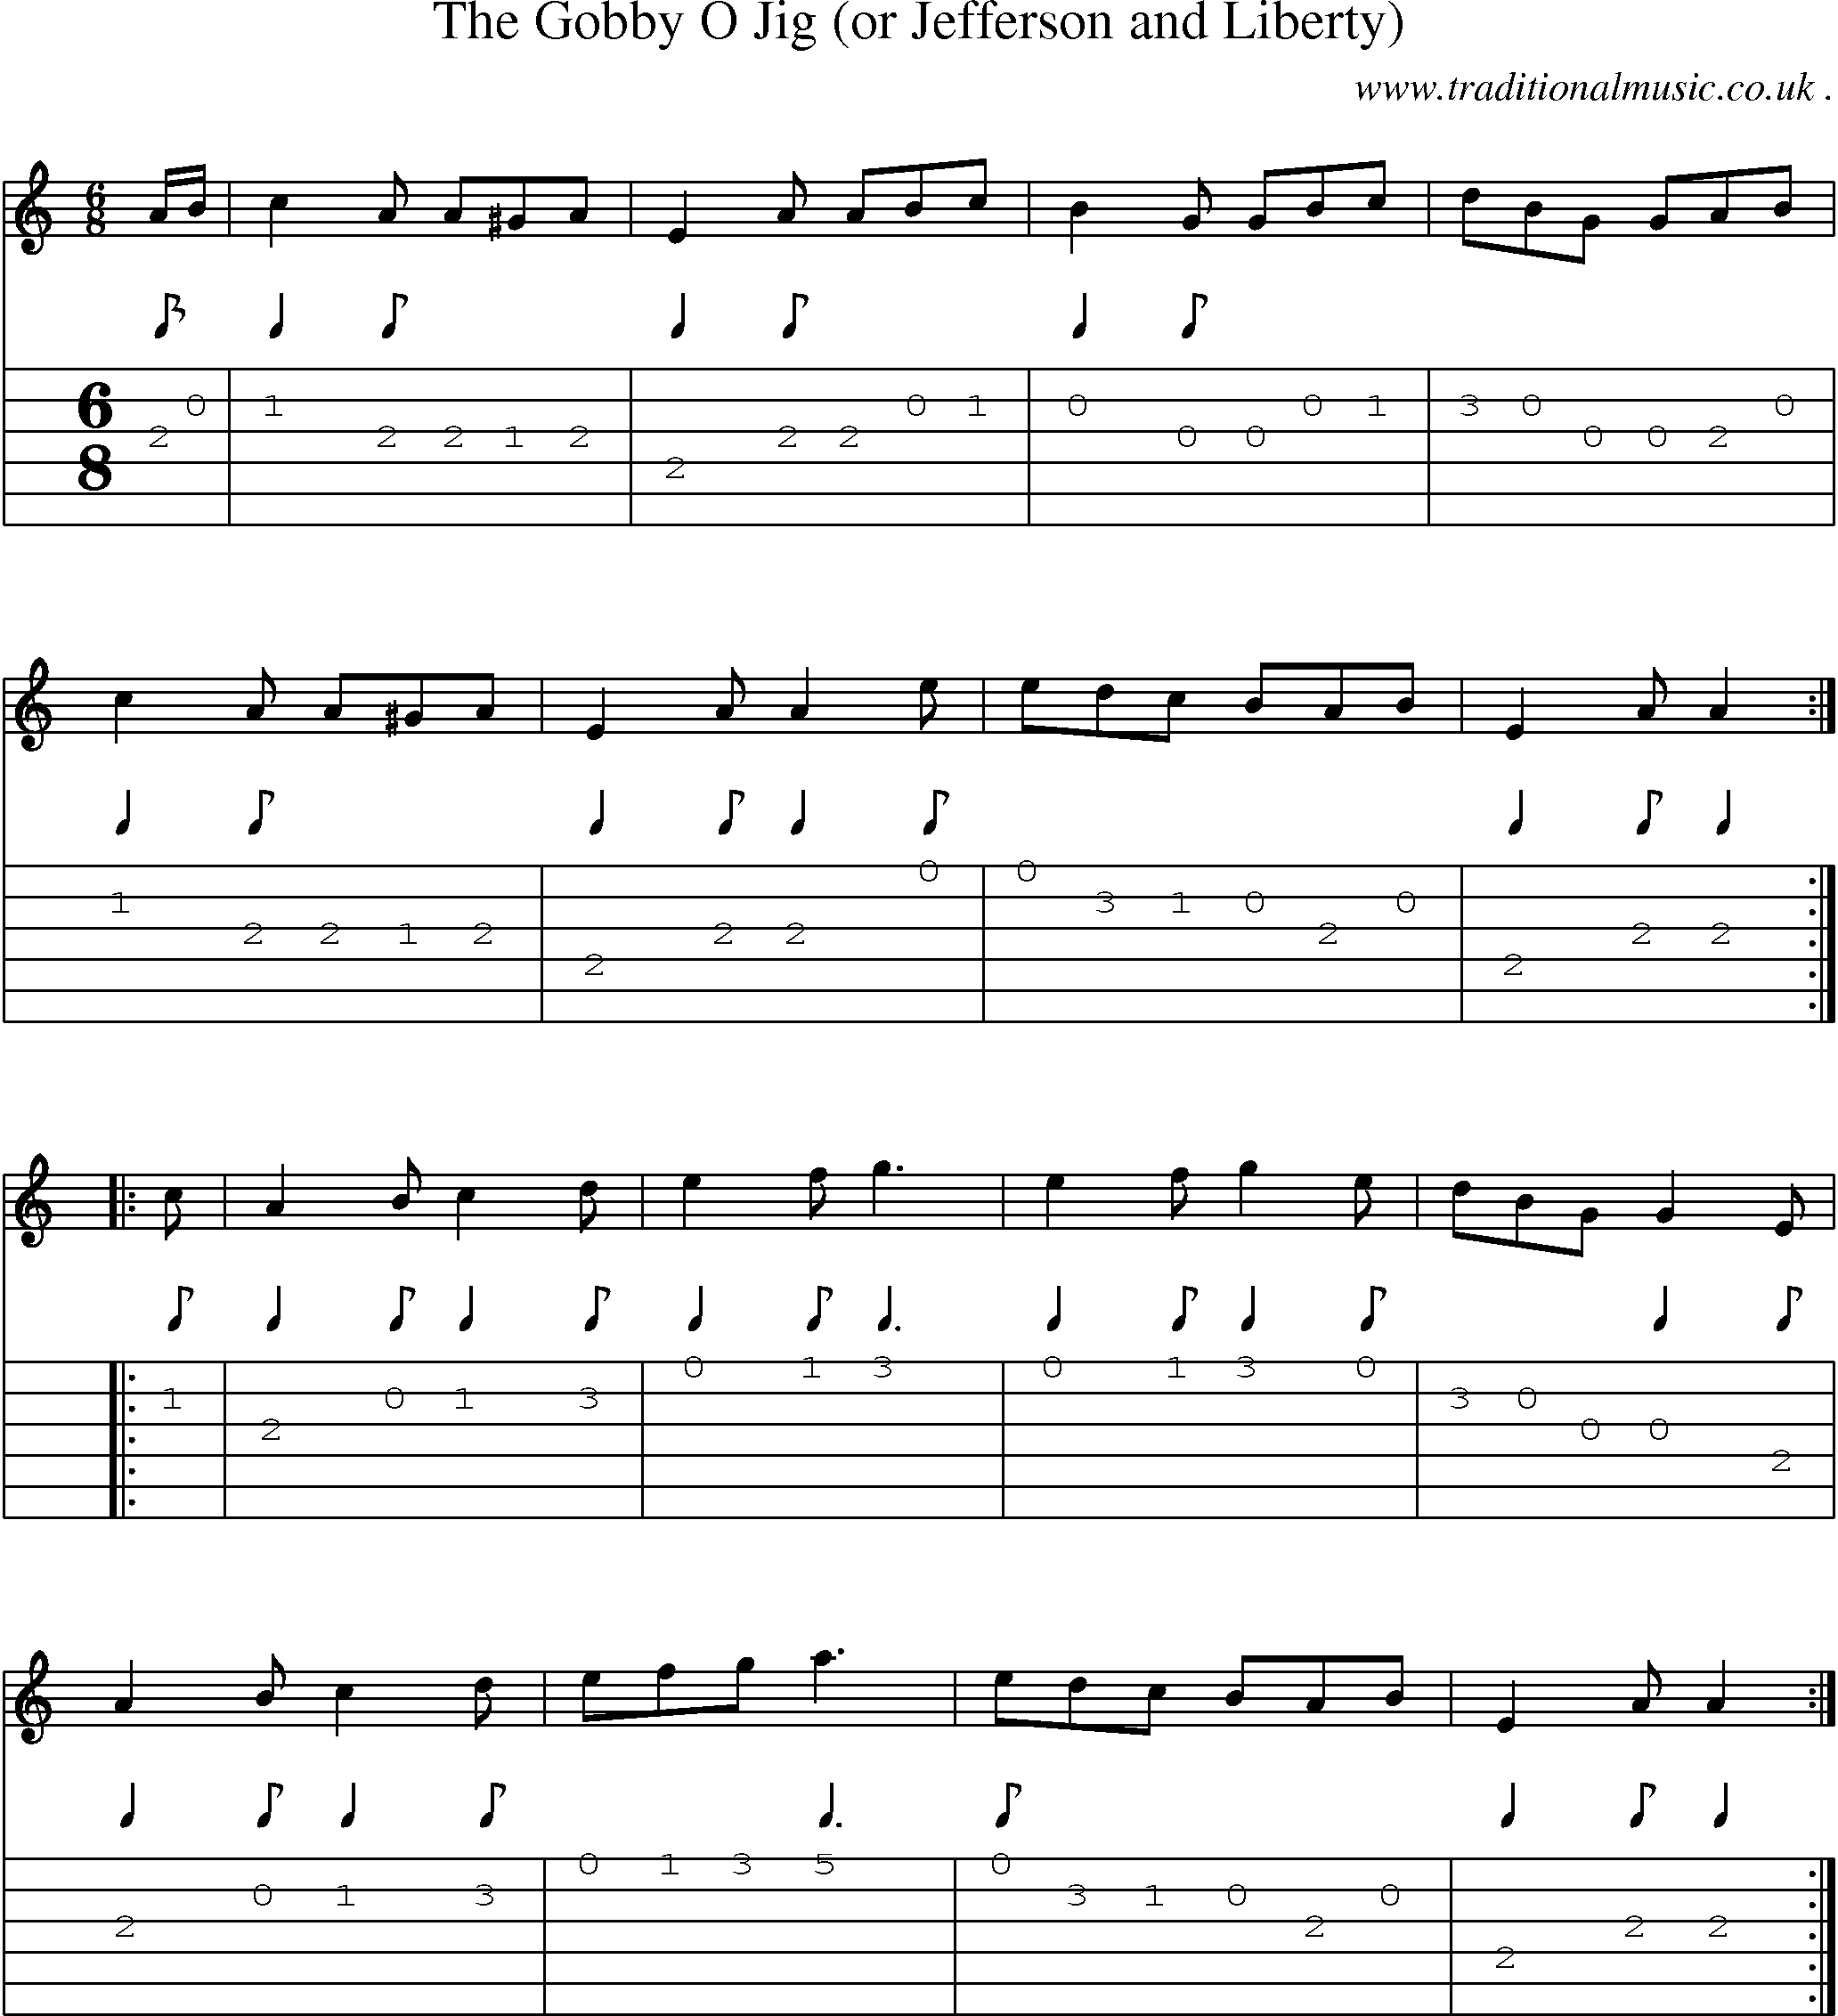 Sheet-Music and Guitar Tabs for The Gobby O Jig (or Jefferson And Liberty)